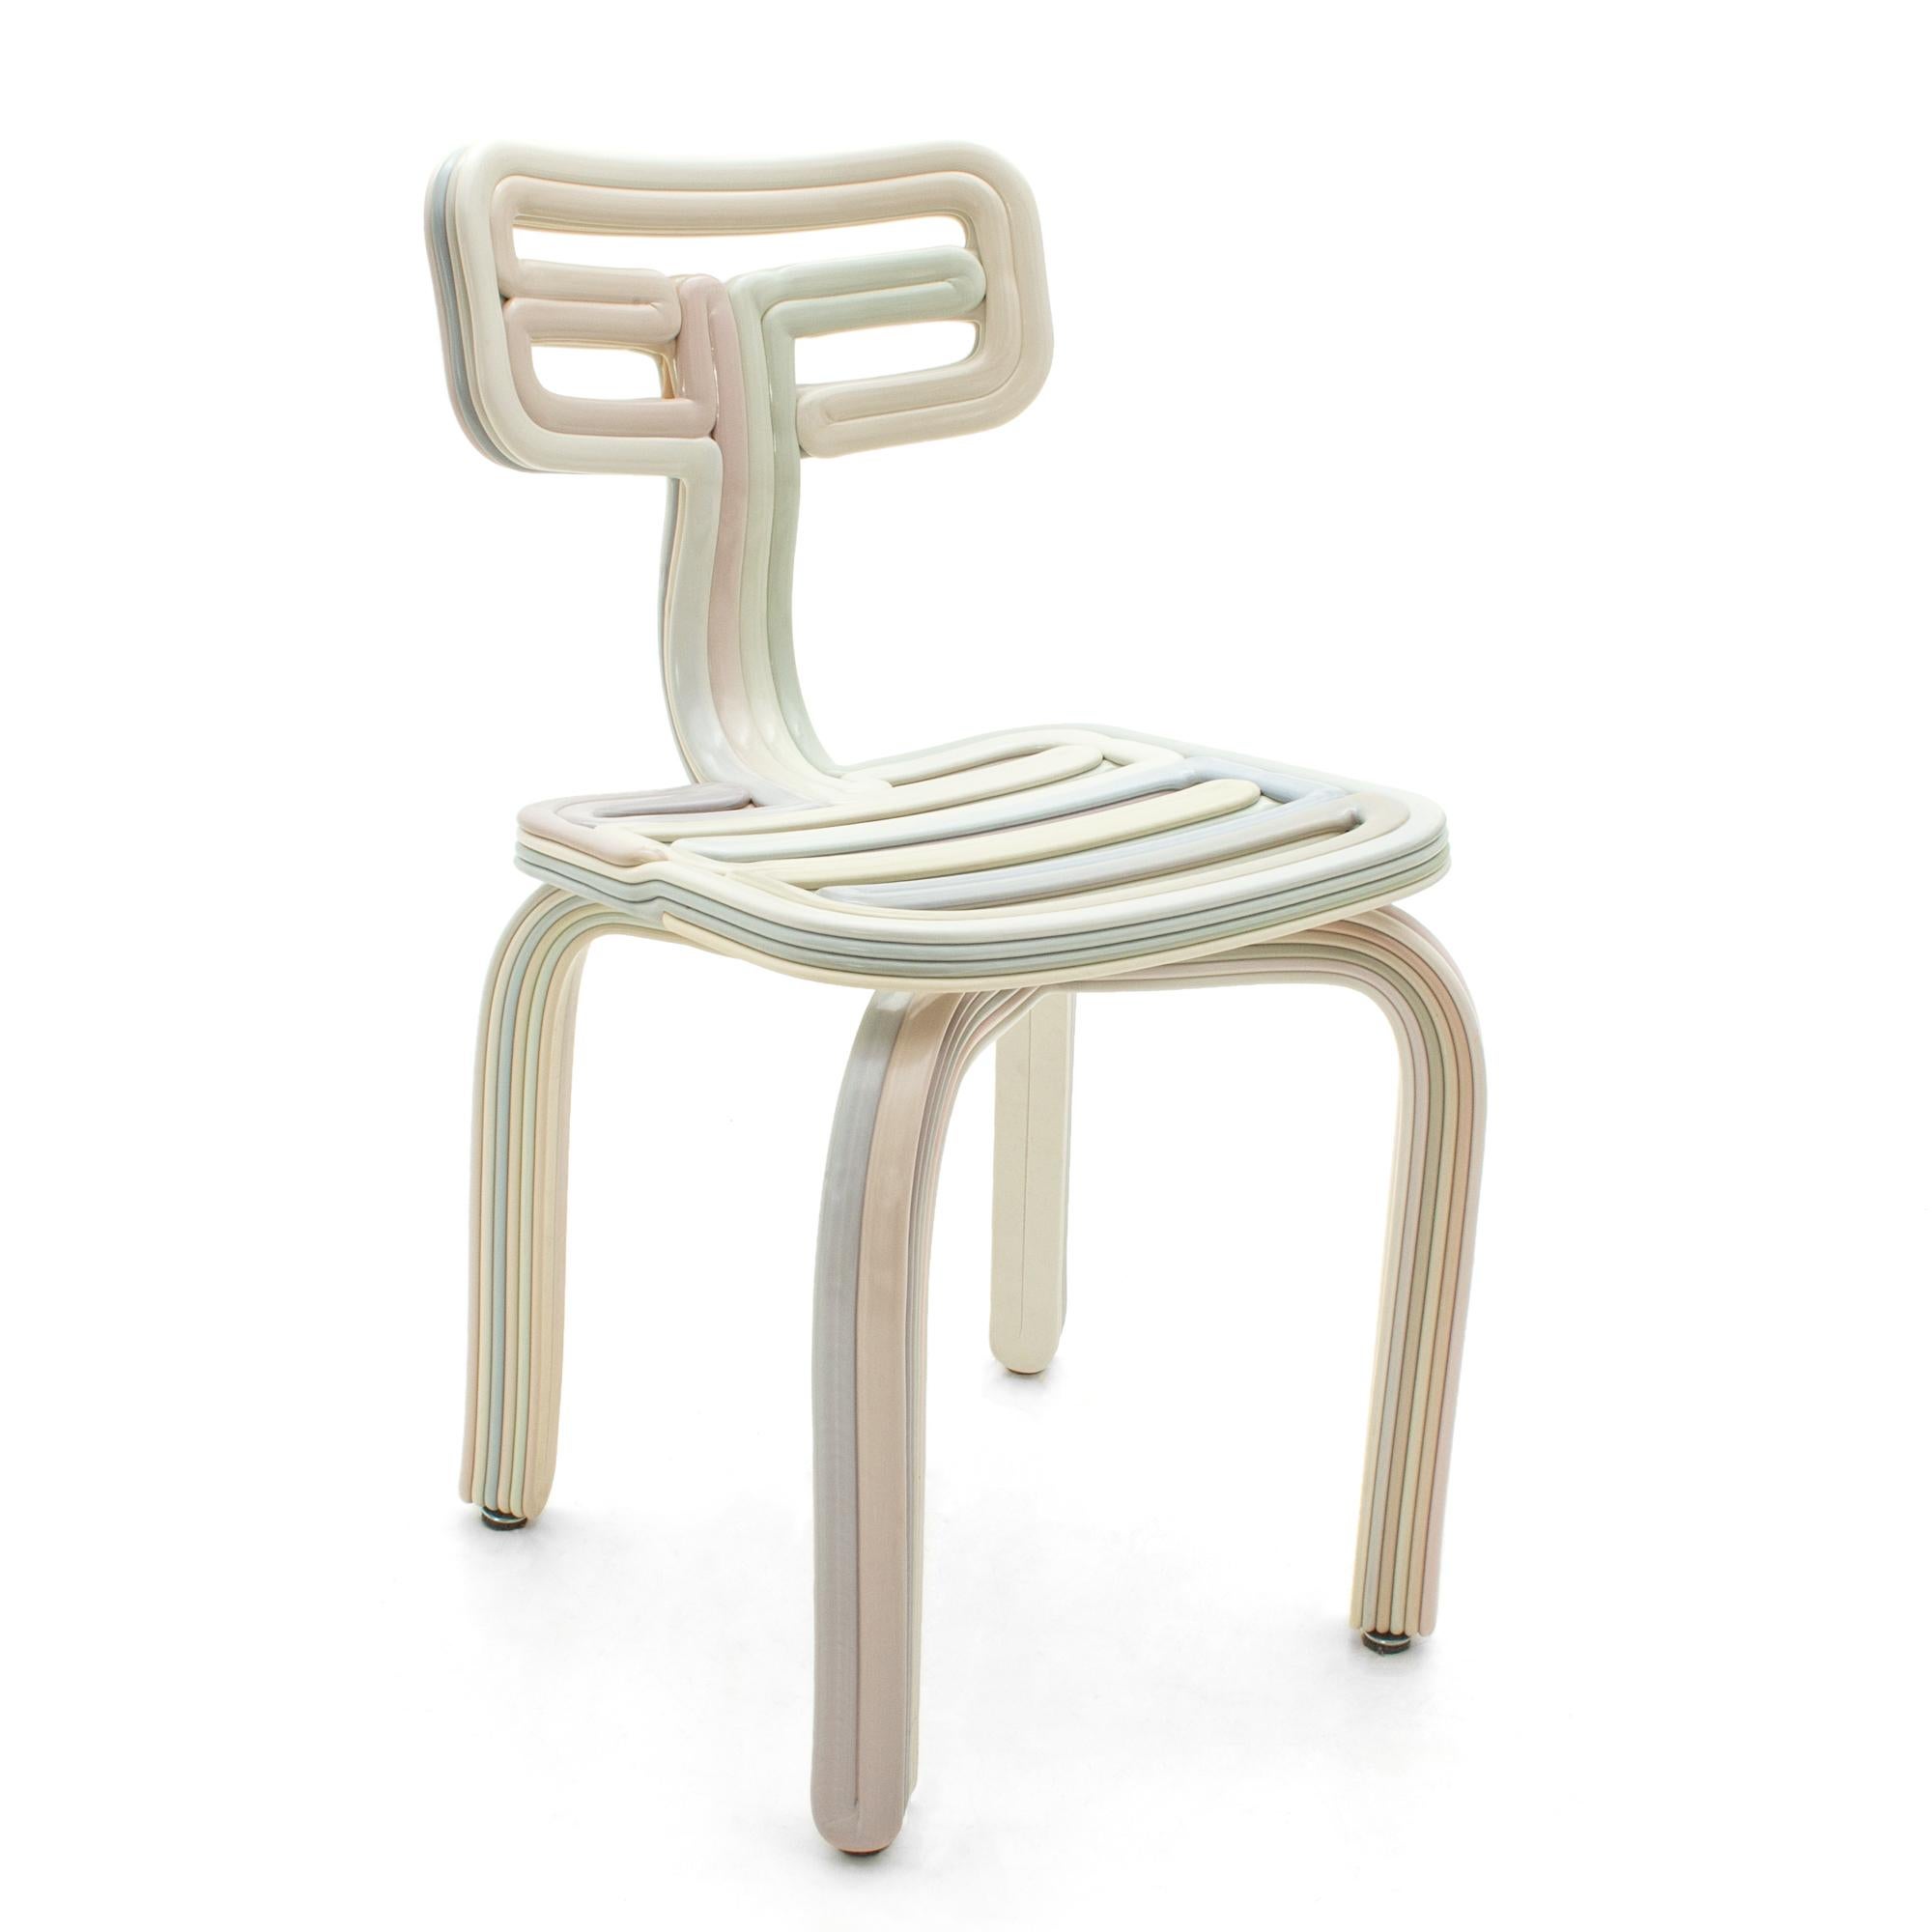 Dirk van der Kooij first fell in love with low resolution 3D printing as a student, fulfilling his search for honest and functional ornamentation. The chubby chair remains his most playful child of this process, which finds its alien form through